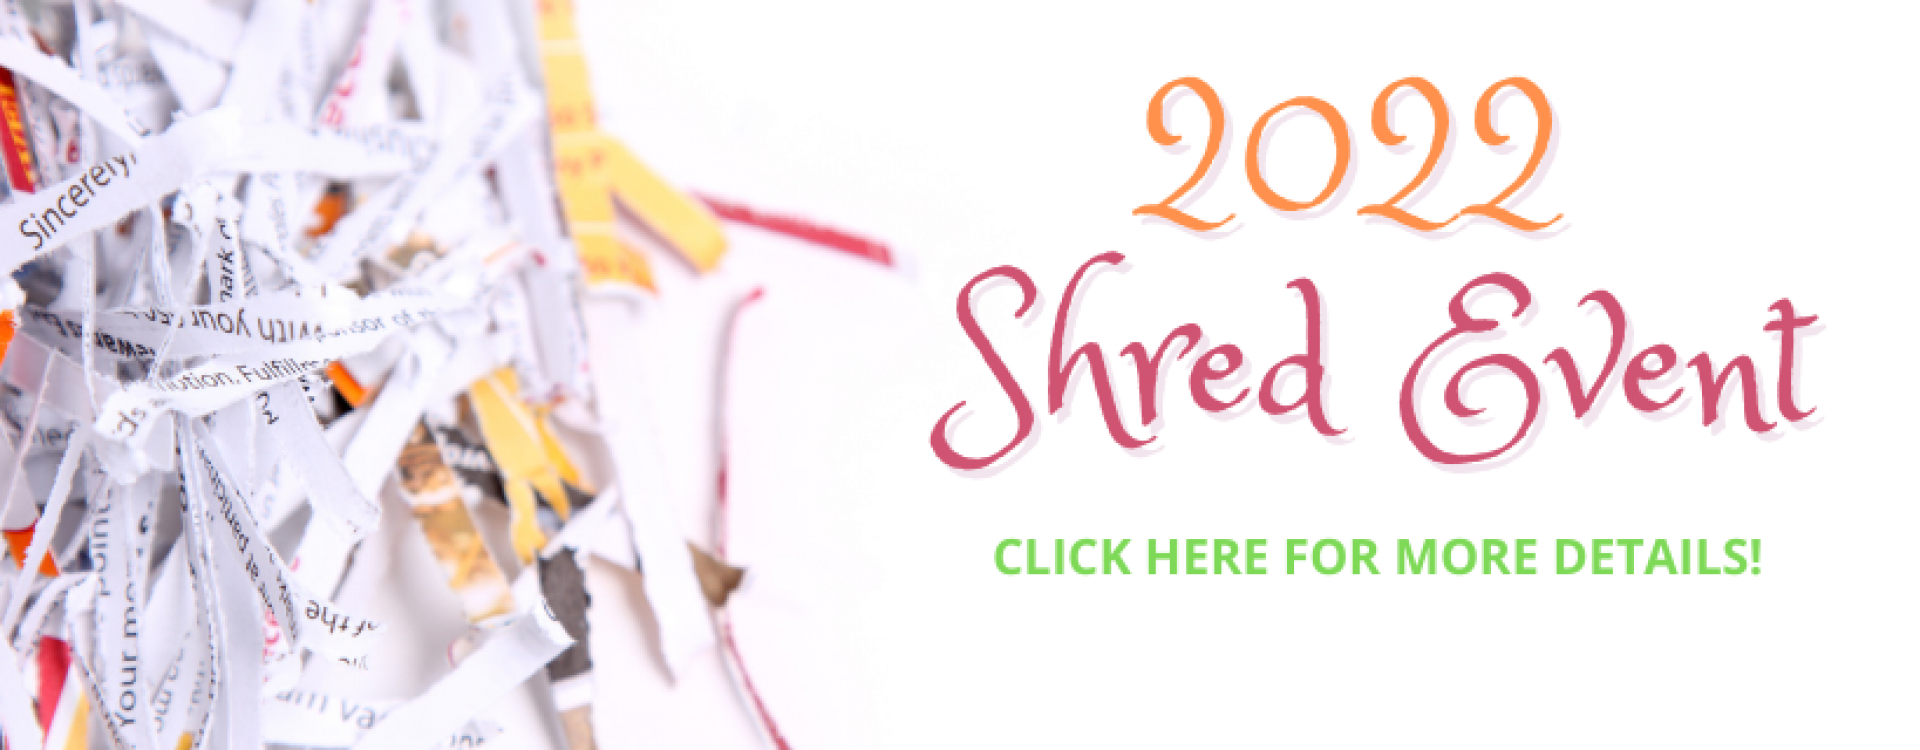 2022 SHRED EVENT! CLICK HERE FOR MORE DETAILS